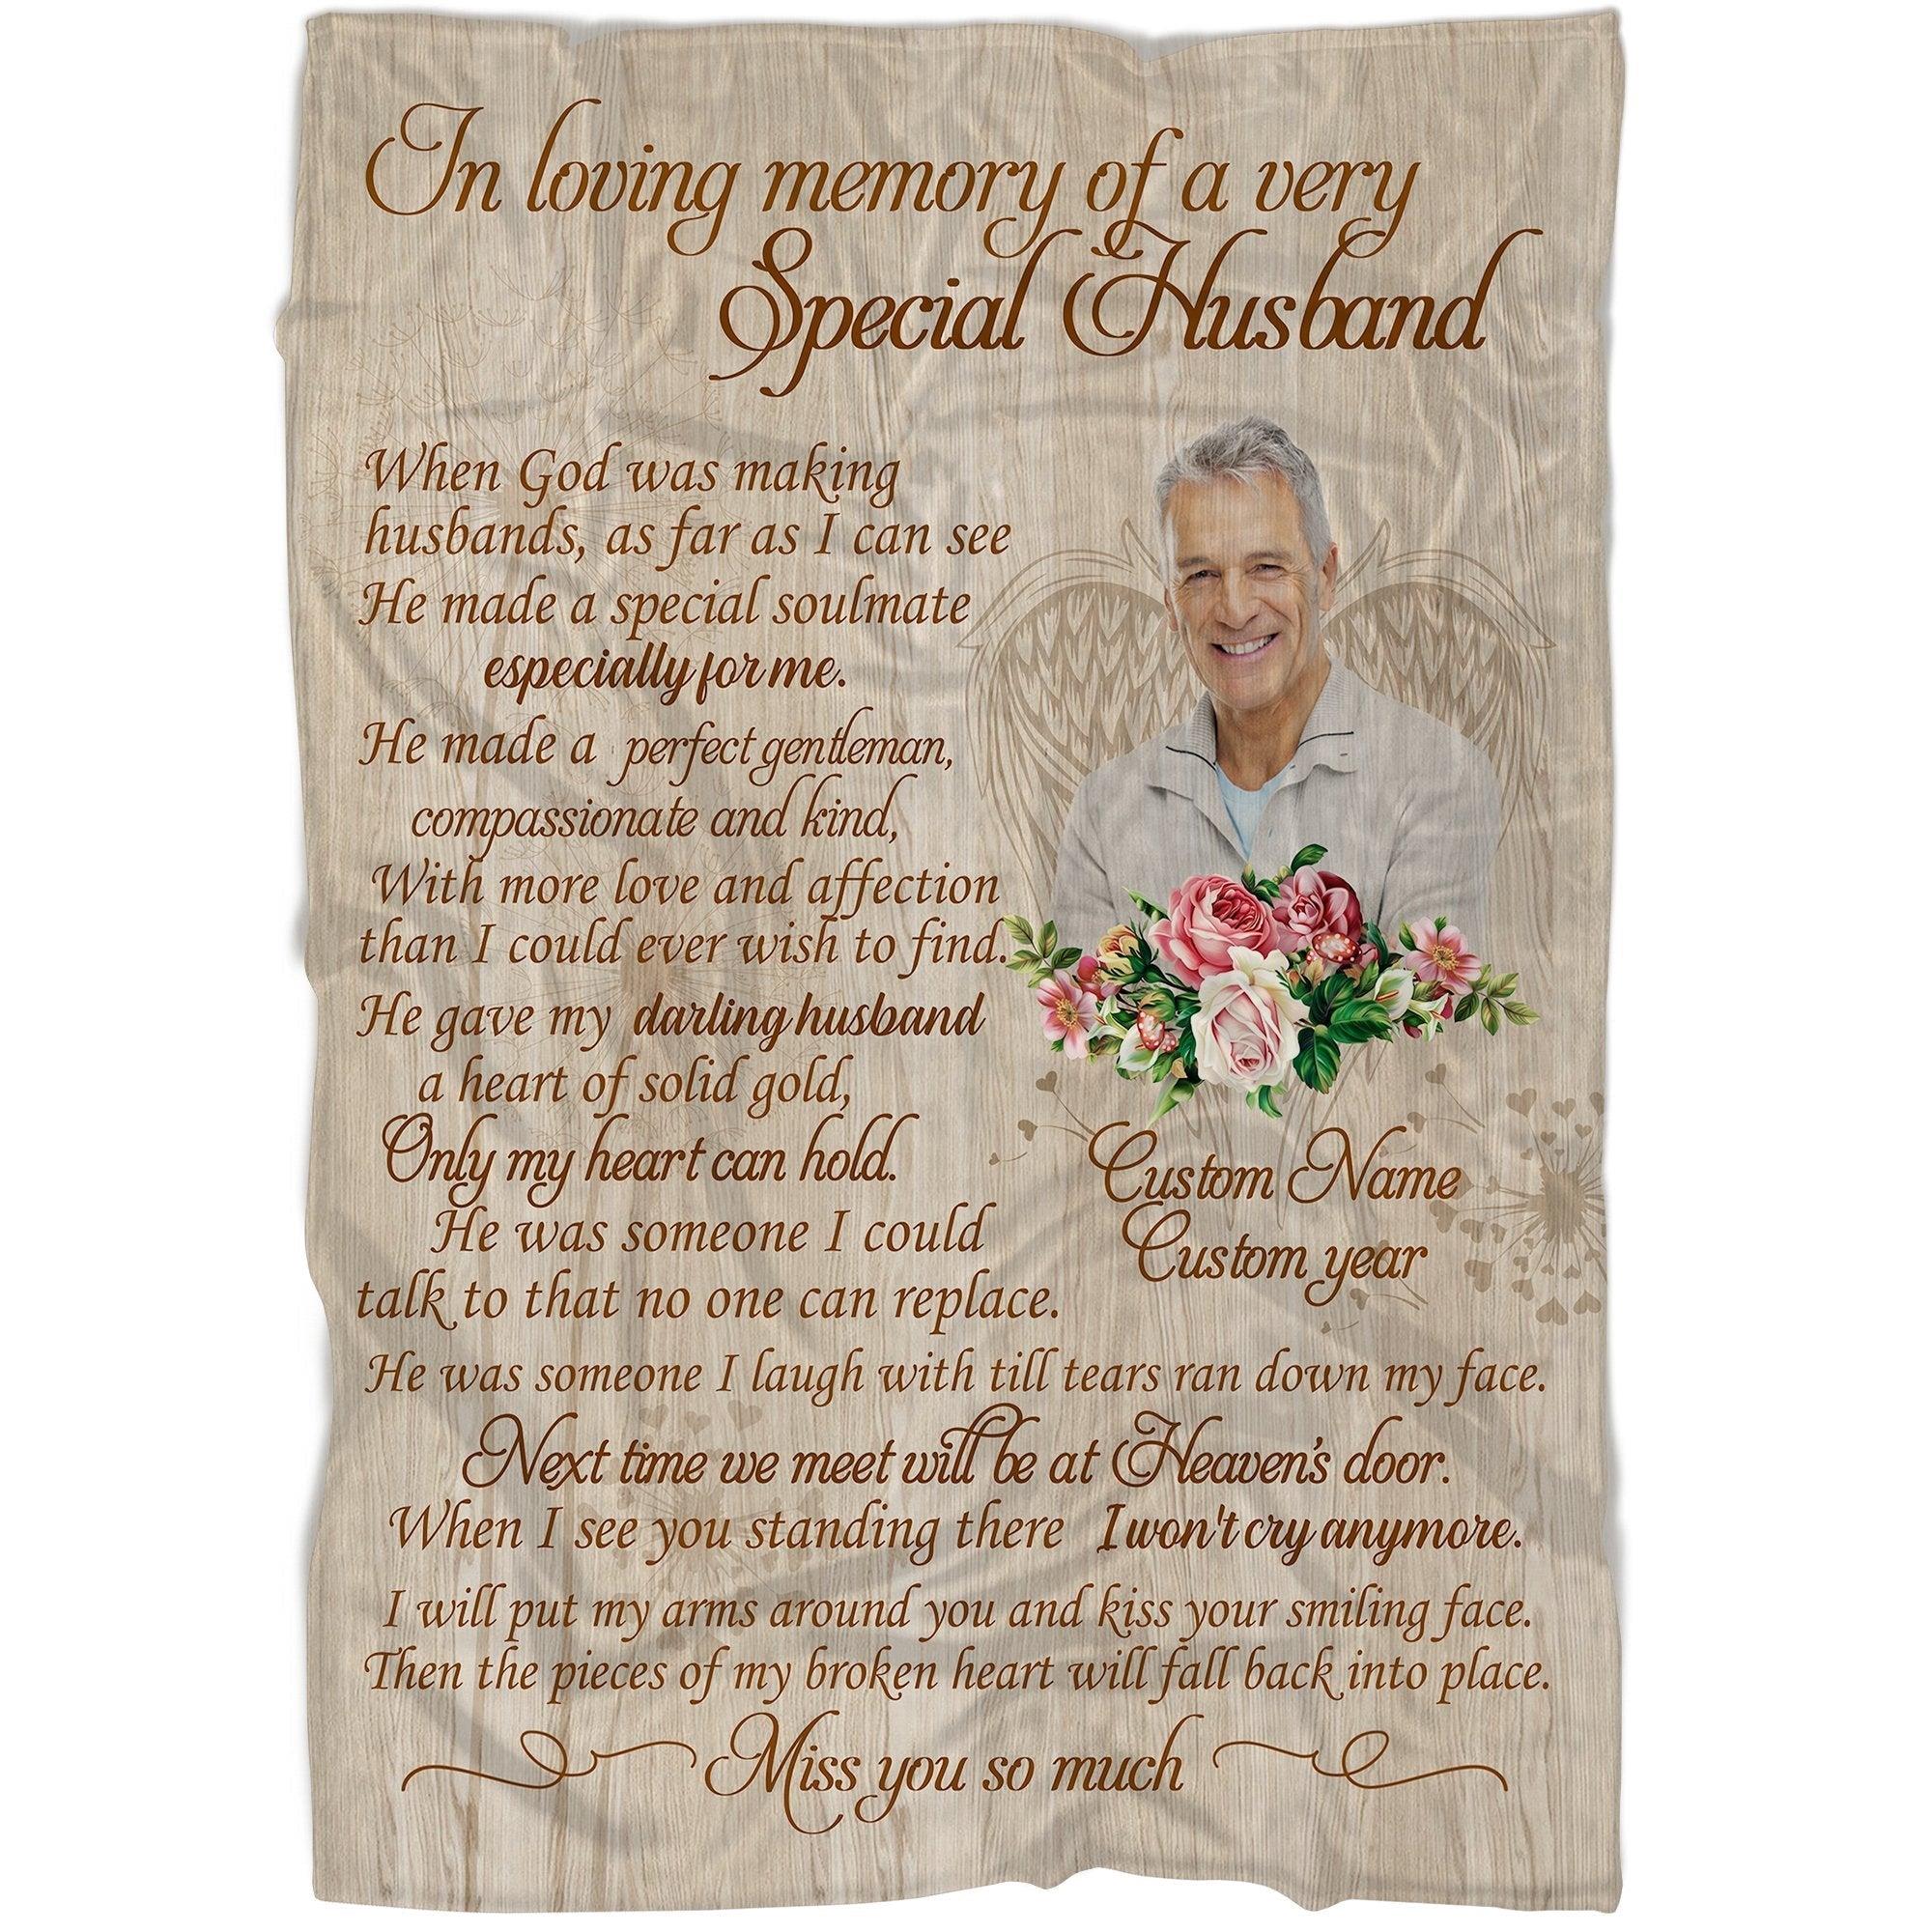 Memorial Blanket - Personalized In Loving Memory Of A Very Special Husband Miss You So Much Fleece Blanket Home Decor Bedding Couch Sofa Soft And Comfy Cozy, Memorial Gift